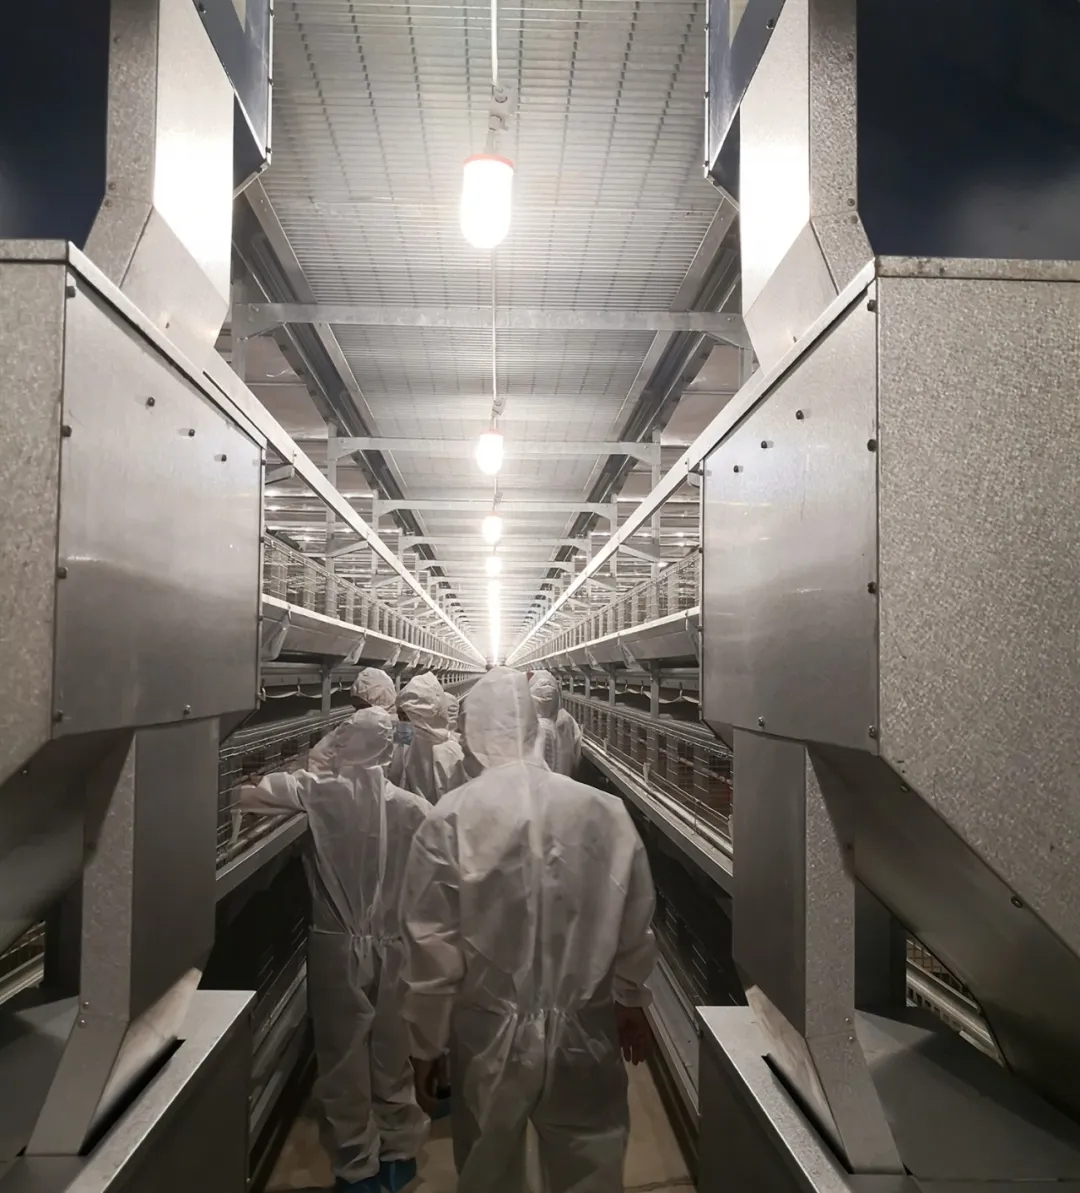 PHNIX Undertakes Heat Pump Project For The Largest Chick Breeding Farm in Asia